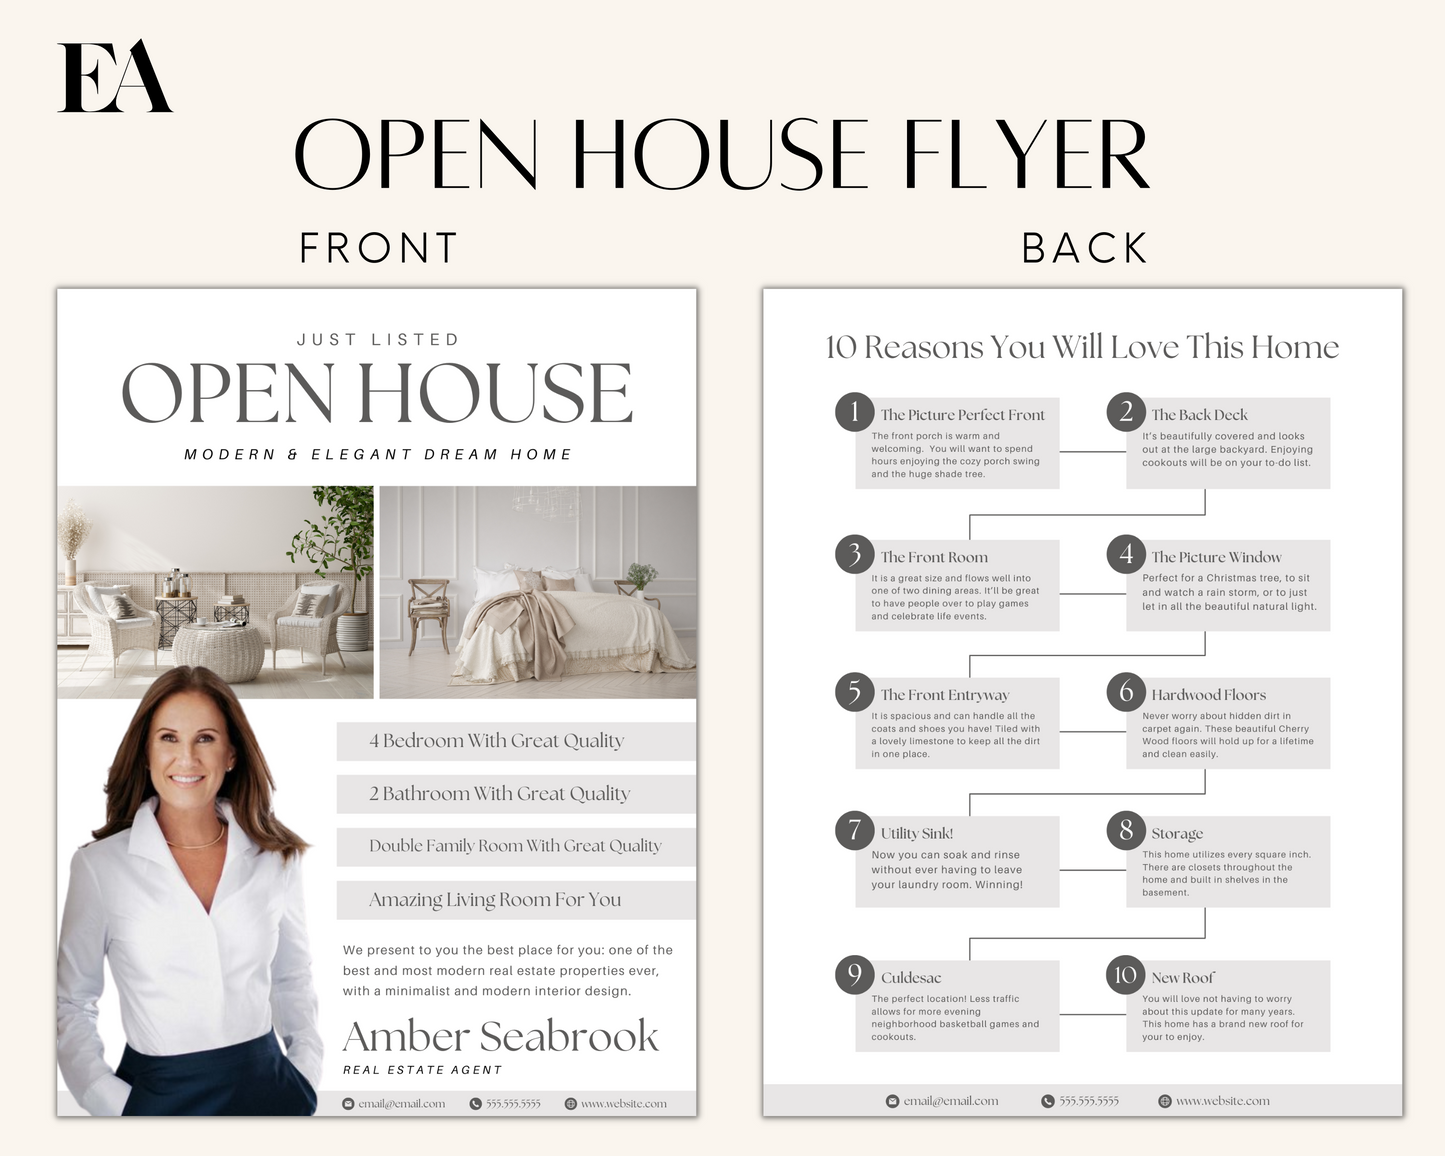 Open House Flyer - Peaceful Brand